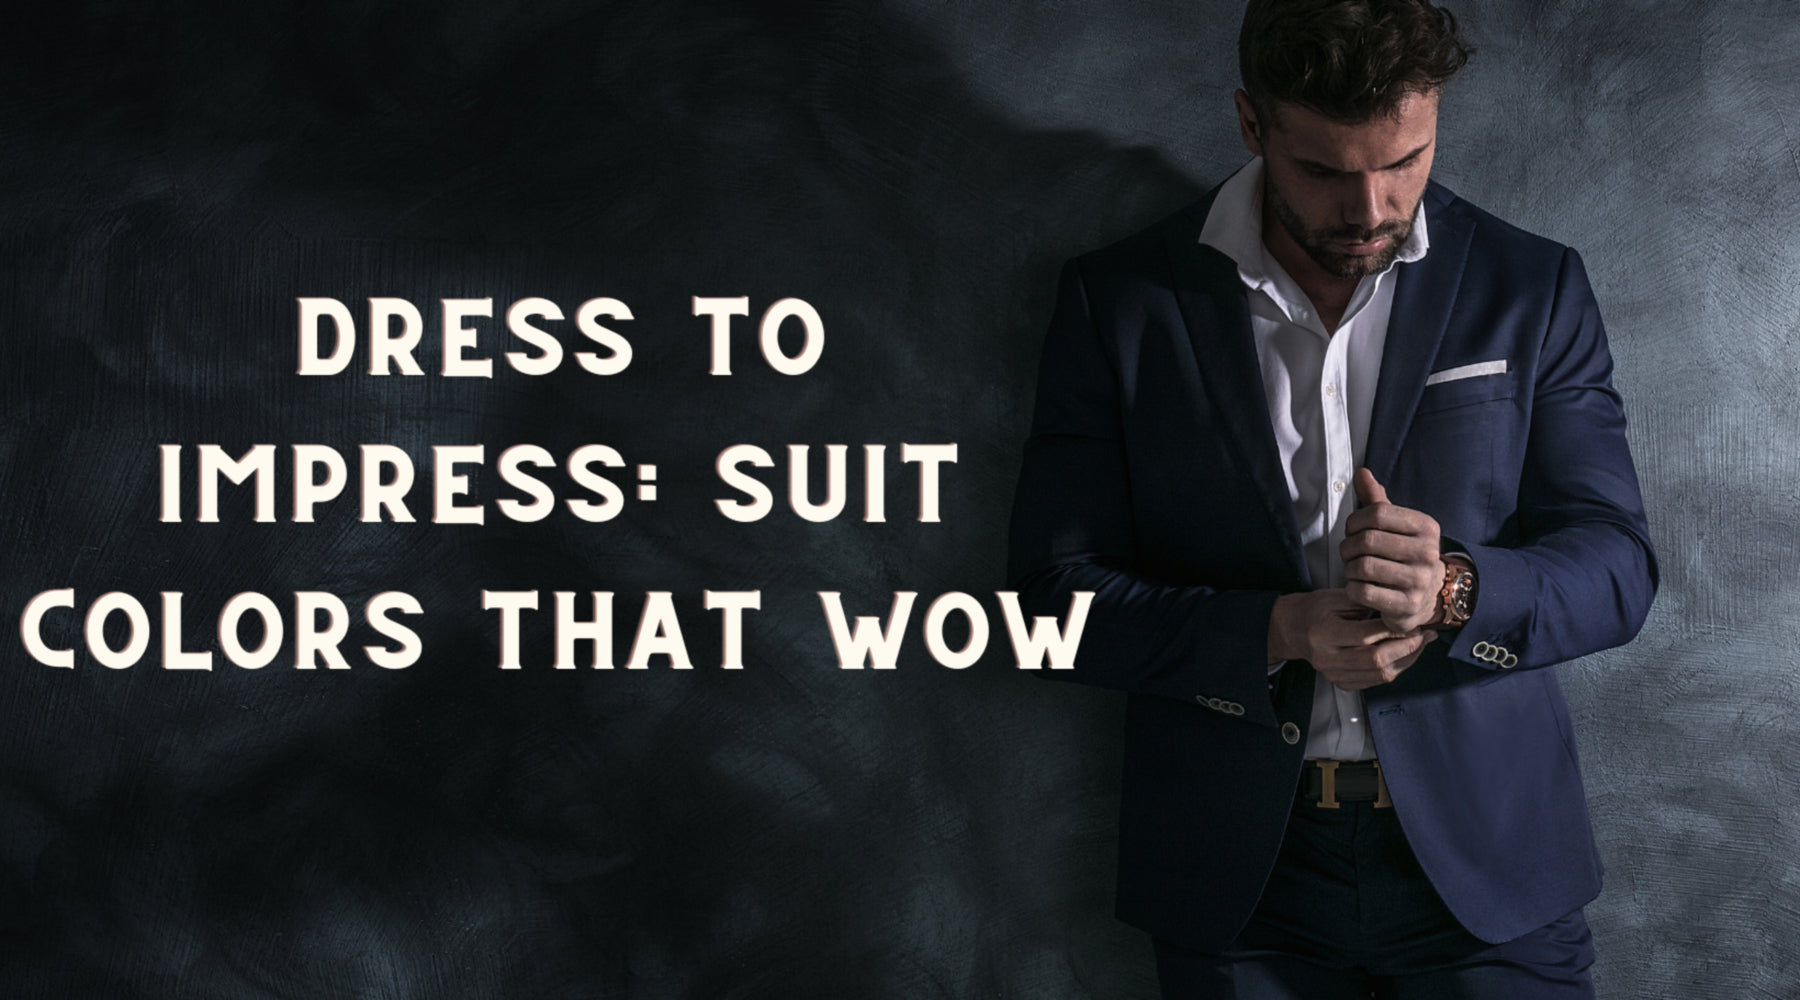 Dress to Impress: Suit Colors That Wow